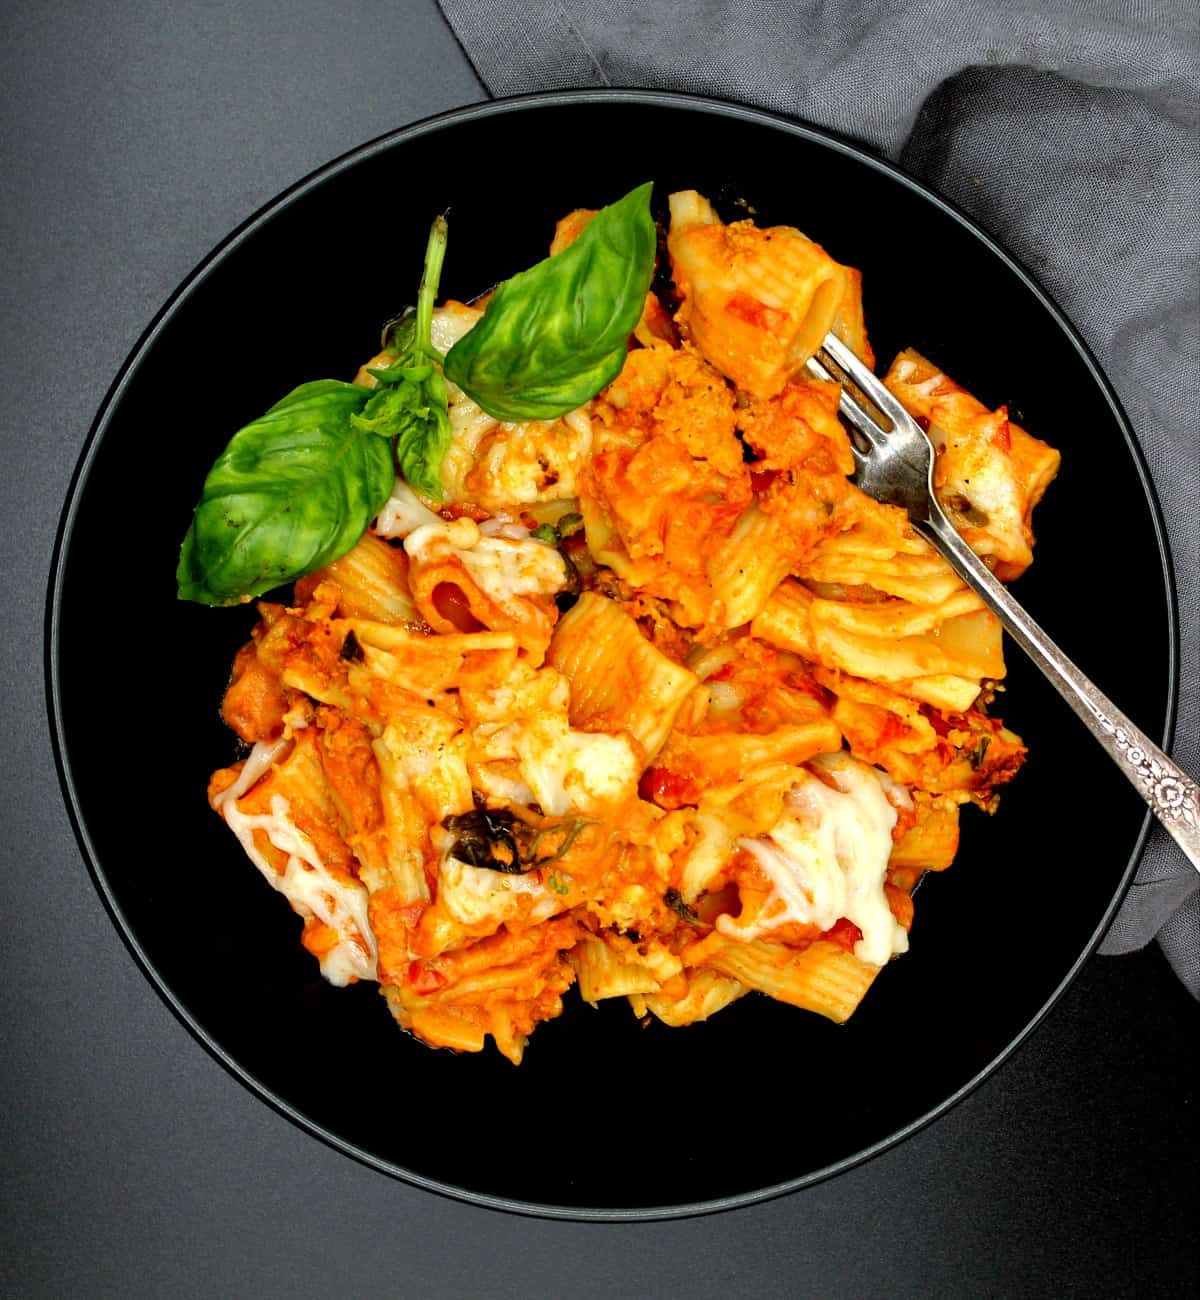 An overhead shot of a black bowl with a serving of creamy, cheesy vegan pasta bake with rigatoni, shreds of vegan mozzarella cheese and a gray napkin.